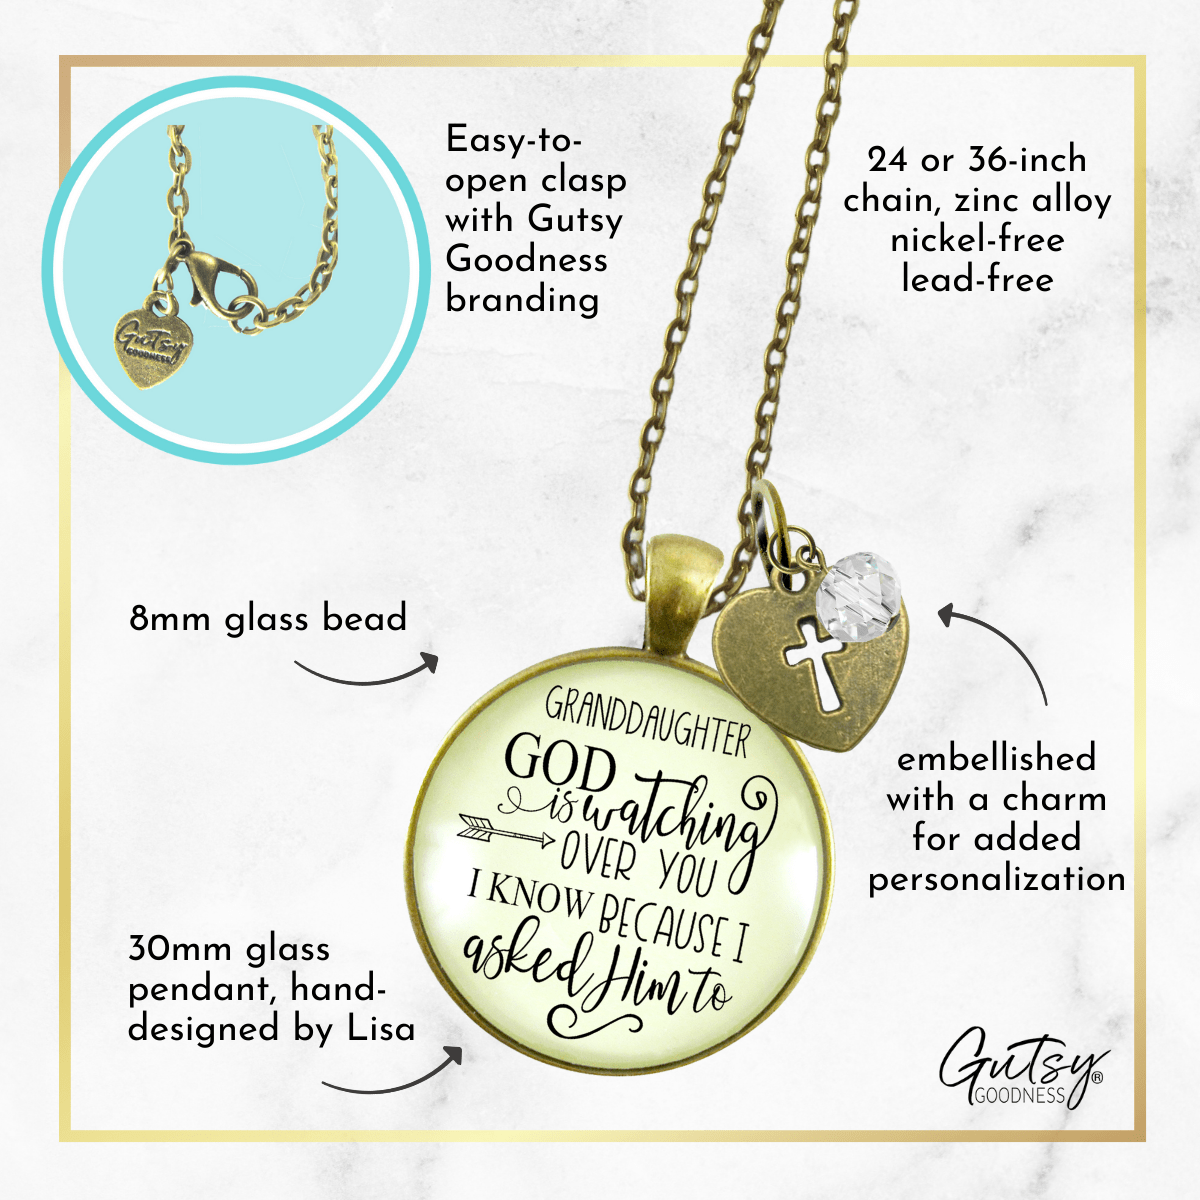 Gutsy Goodness Granddaughter Necklace He is Watching Over You Jewelry Gift from Grandma Grandpa - Gutsy Goodness;Granddaughter Necklace He Is Watching Over You Jewelry Gift From Grandma Grandpa - Gutsy Goodness Handmade Jewelry Gifts